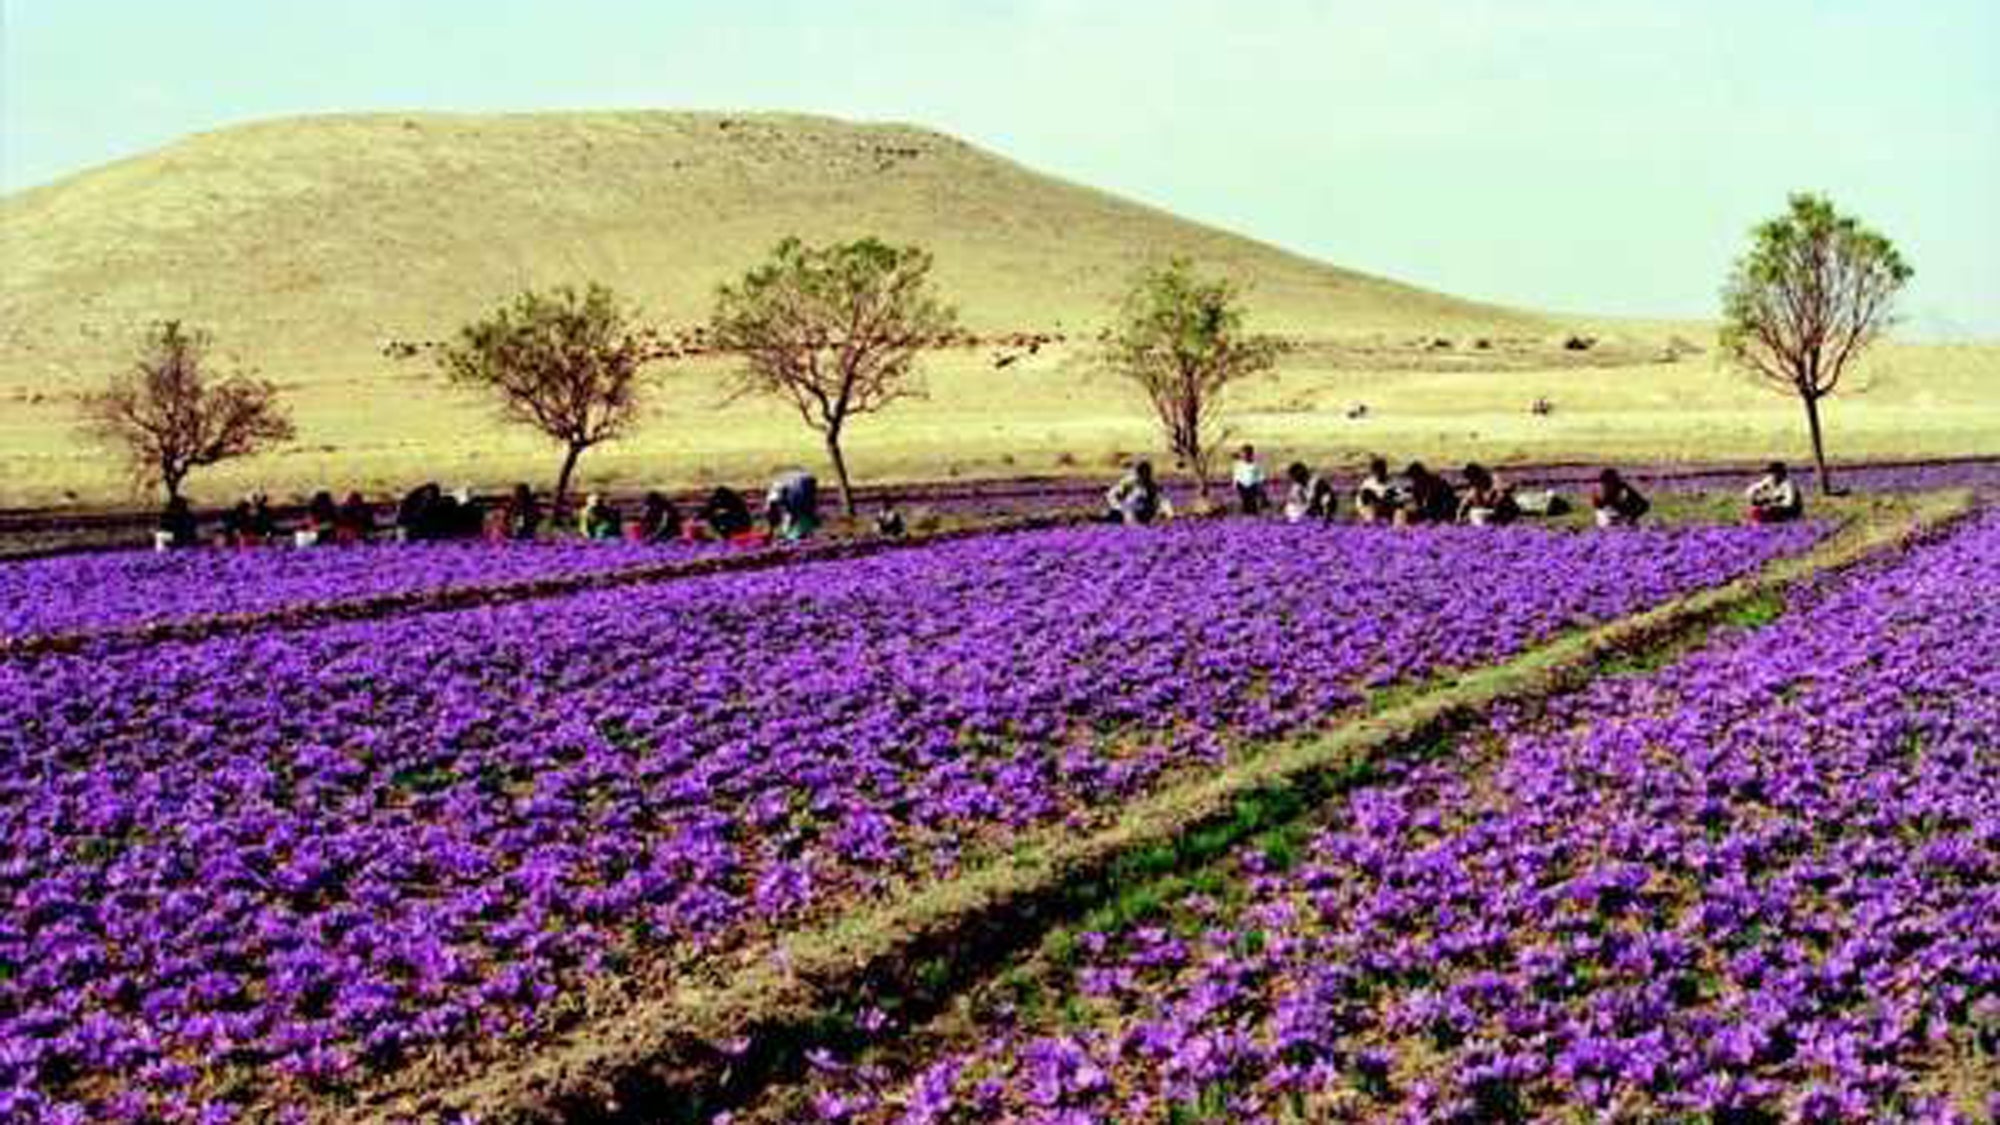 Saffron – the facts about the world’s most expensive spice